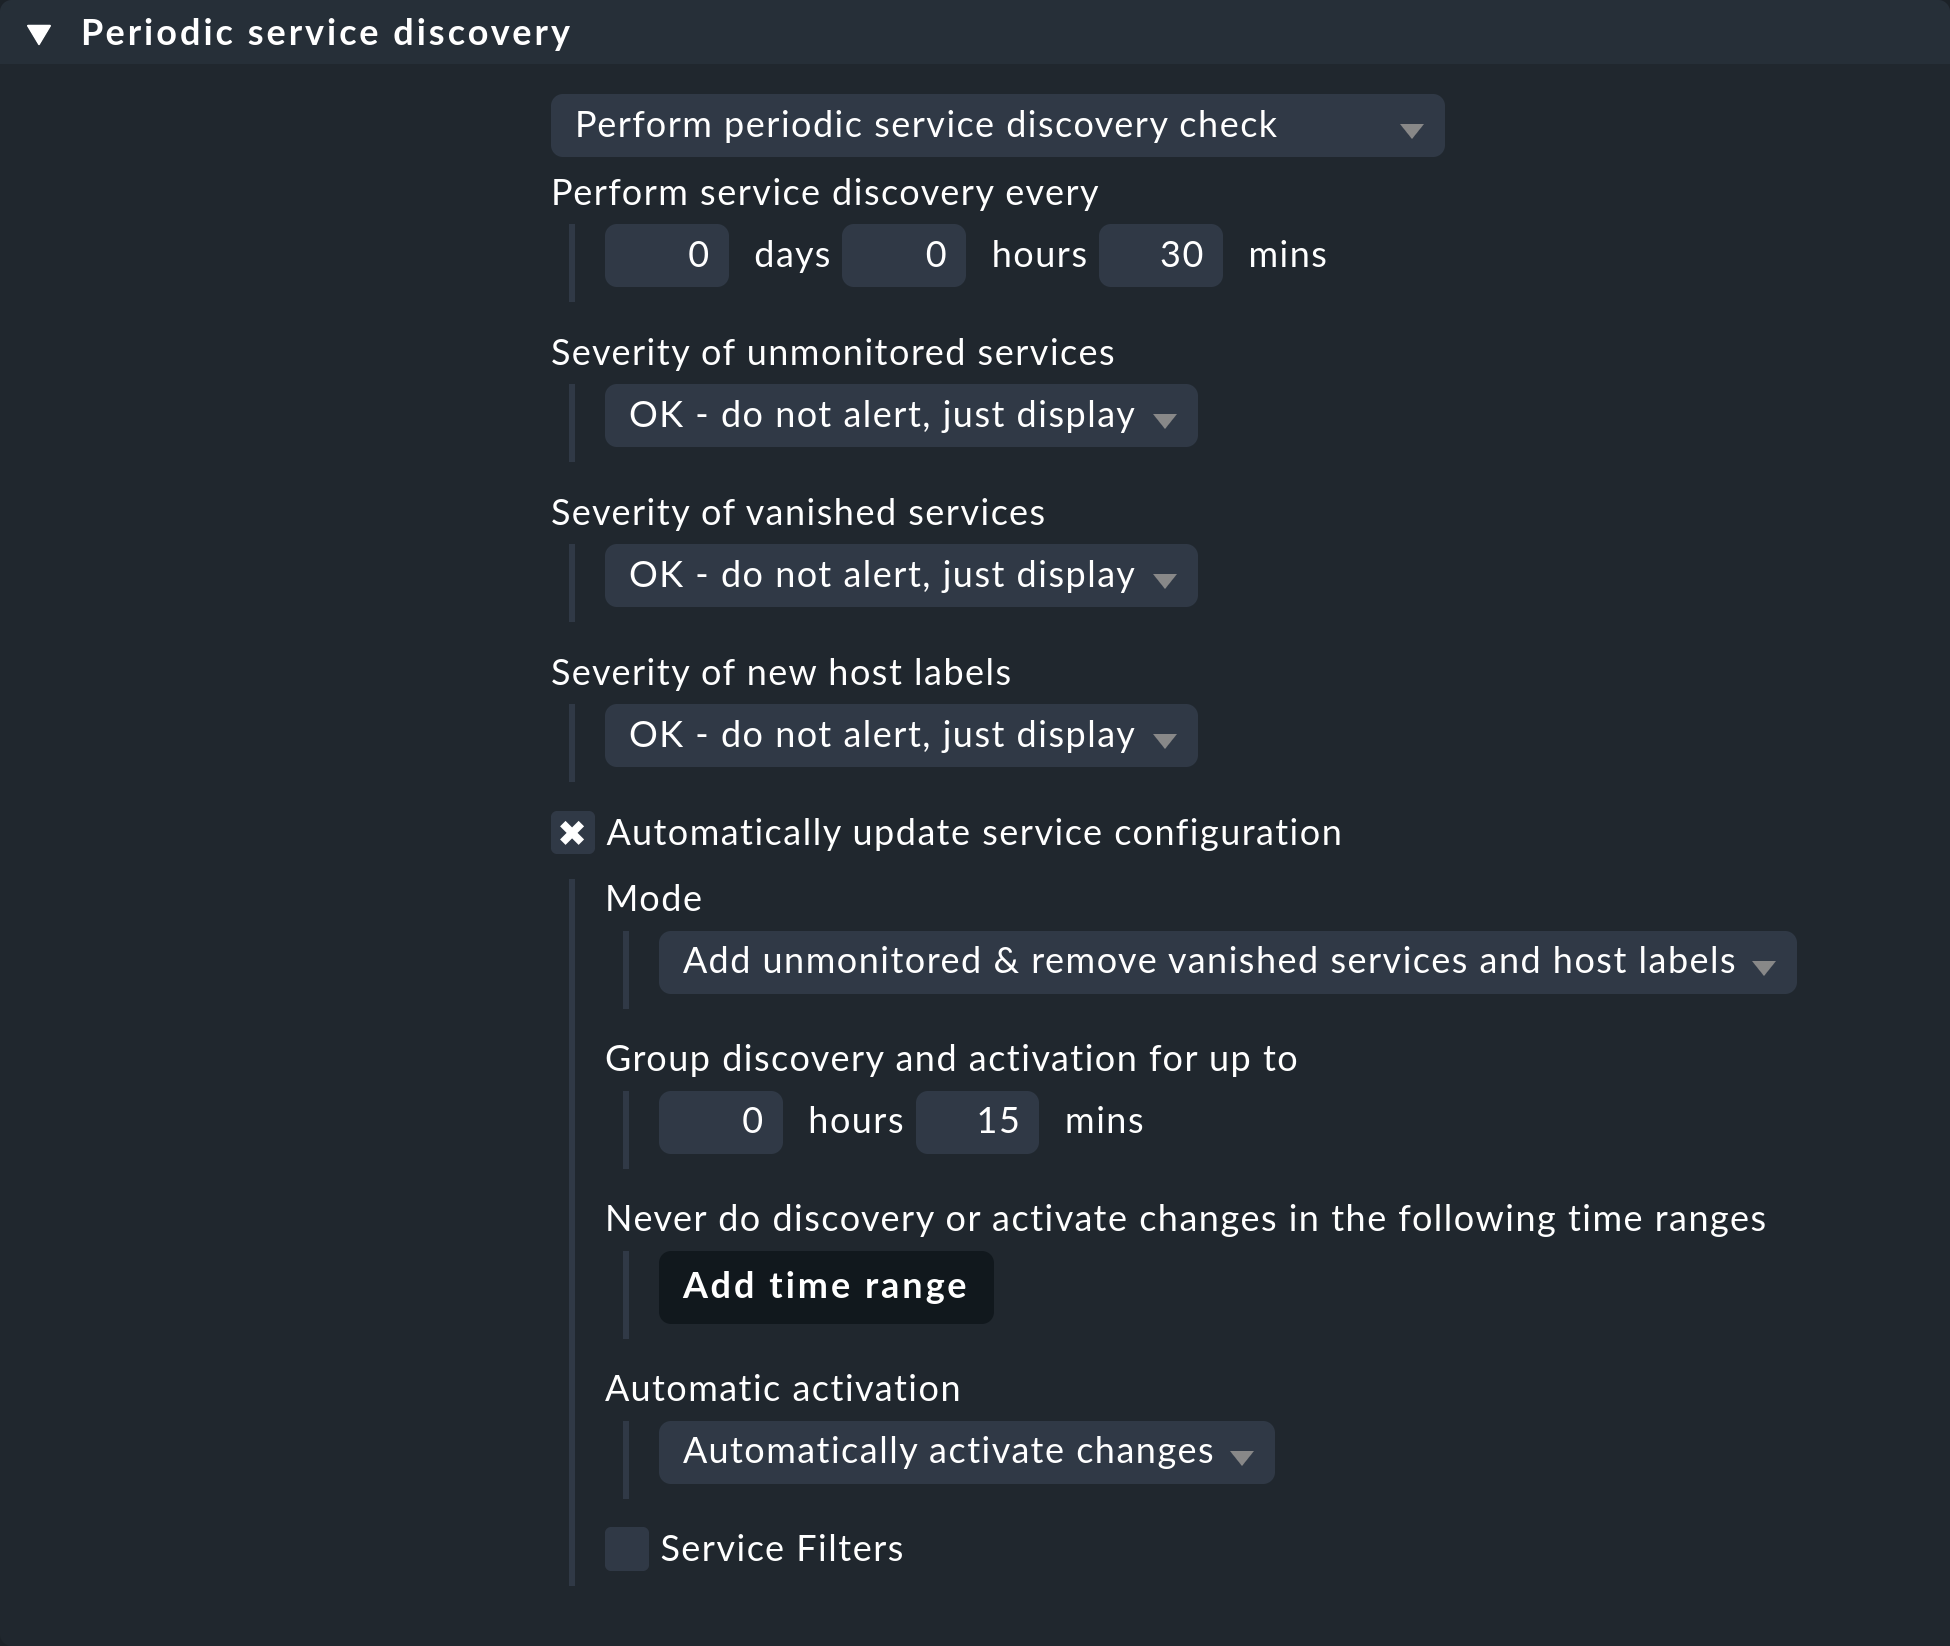 An example setup for the periodic service discovery for Kubernetes objects.